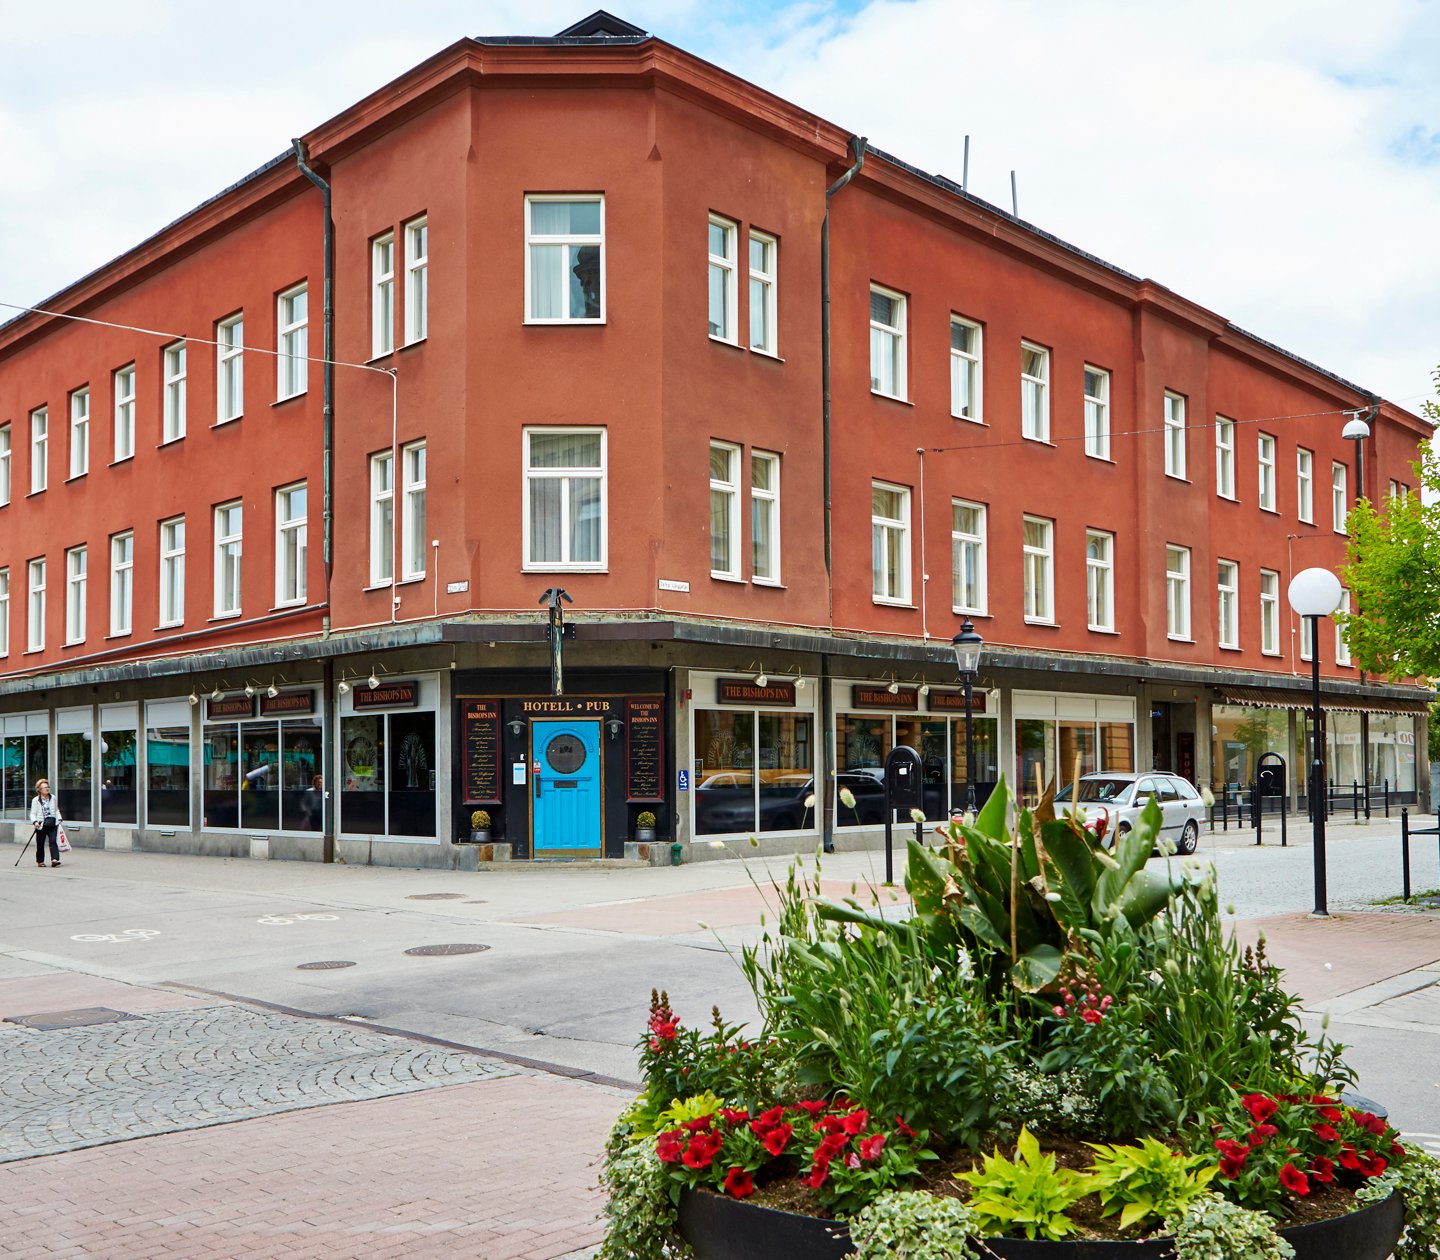 The facade of Hotel Bishops Arms in Kristianstad